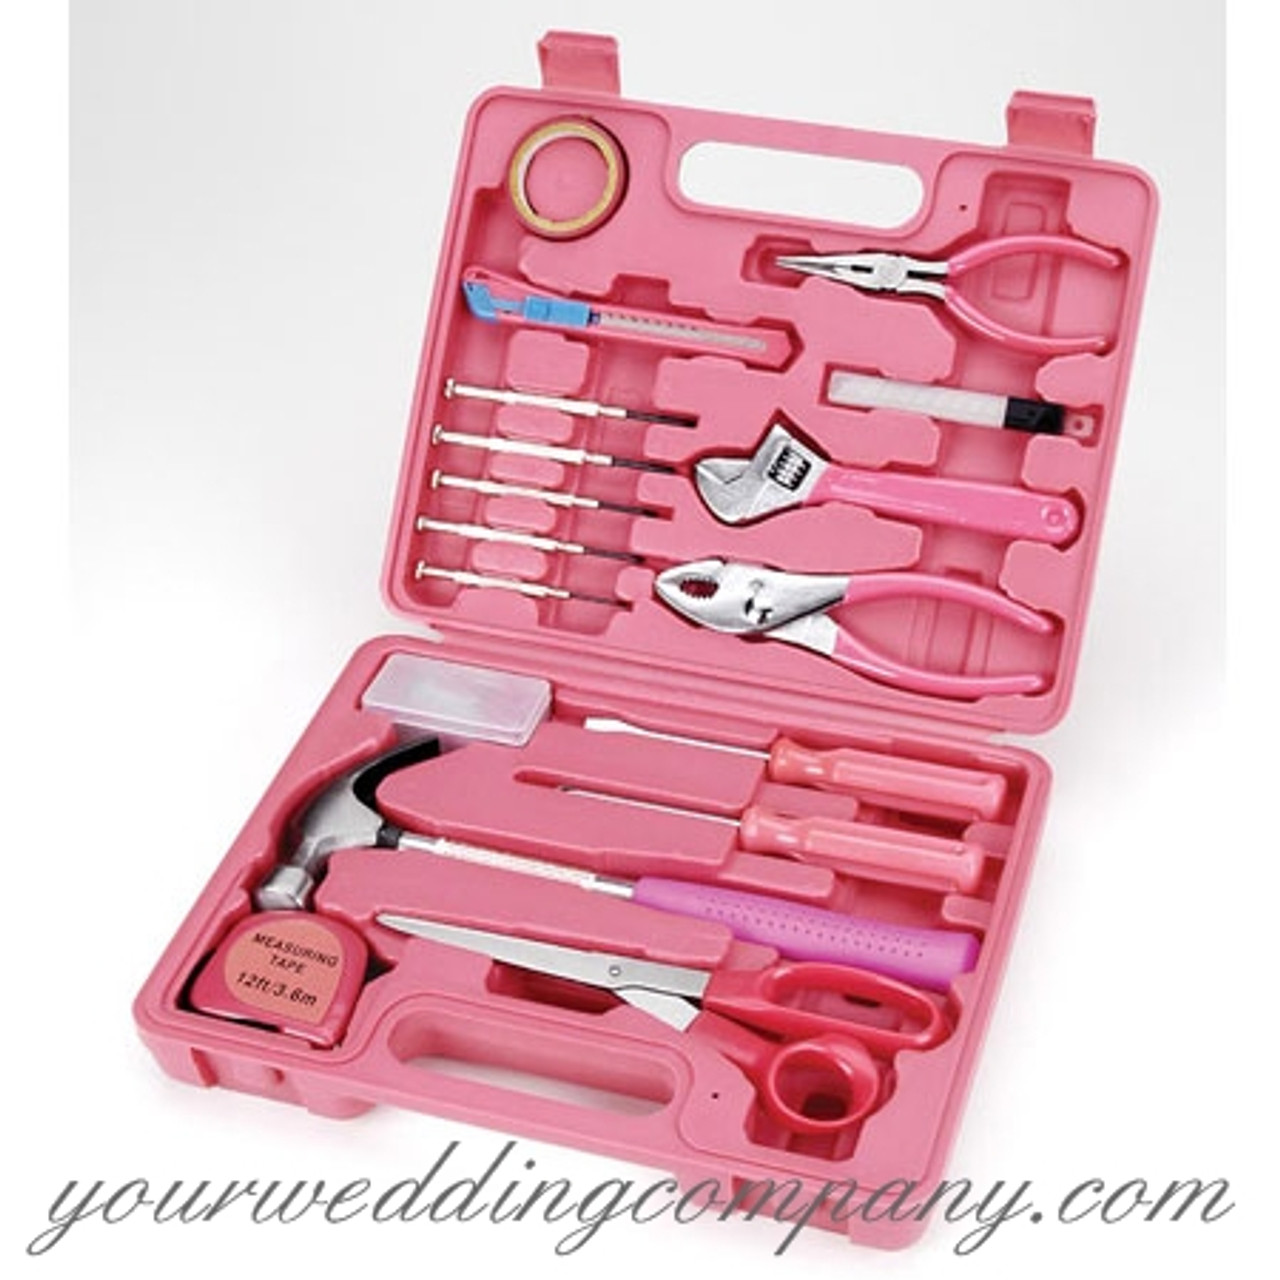 Pink Crafter's Toolbox, Craft Tools and Case